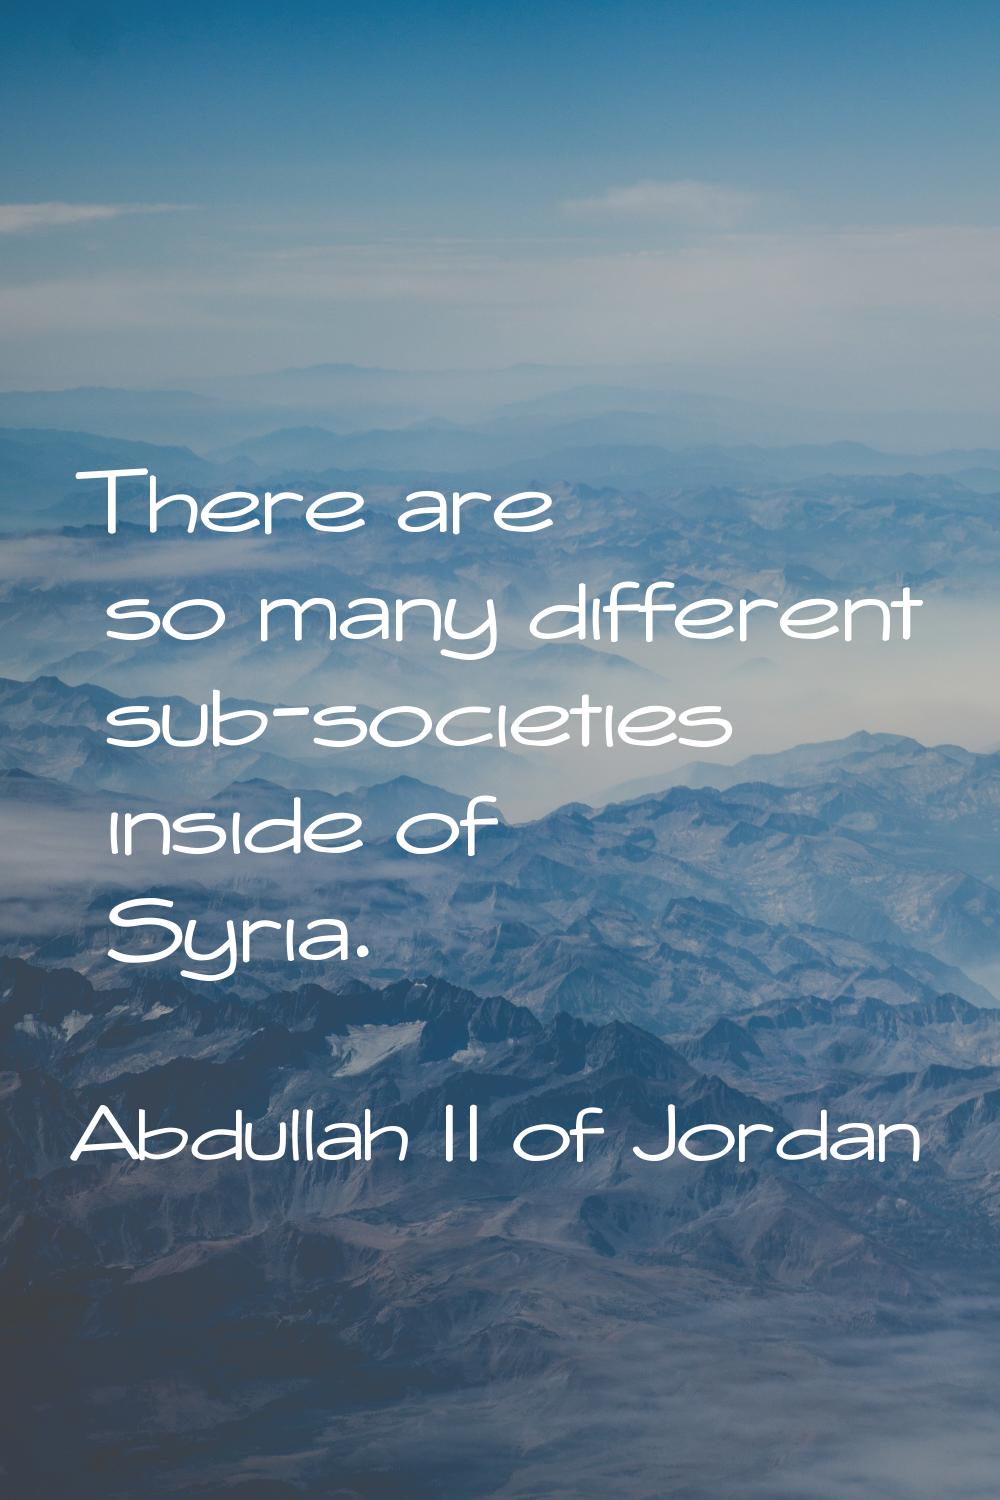 There are so many different sub-societies inside of Syria.